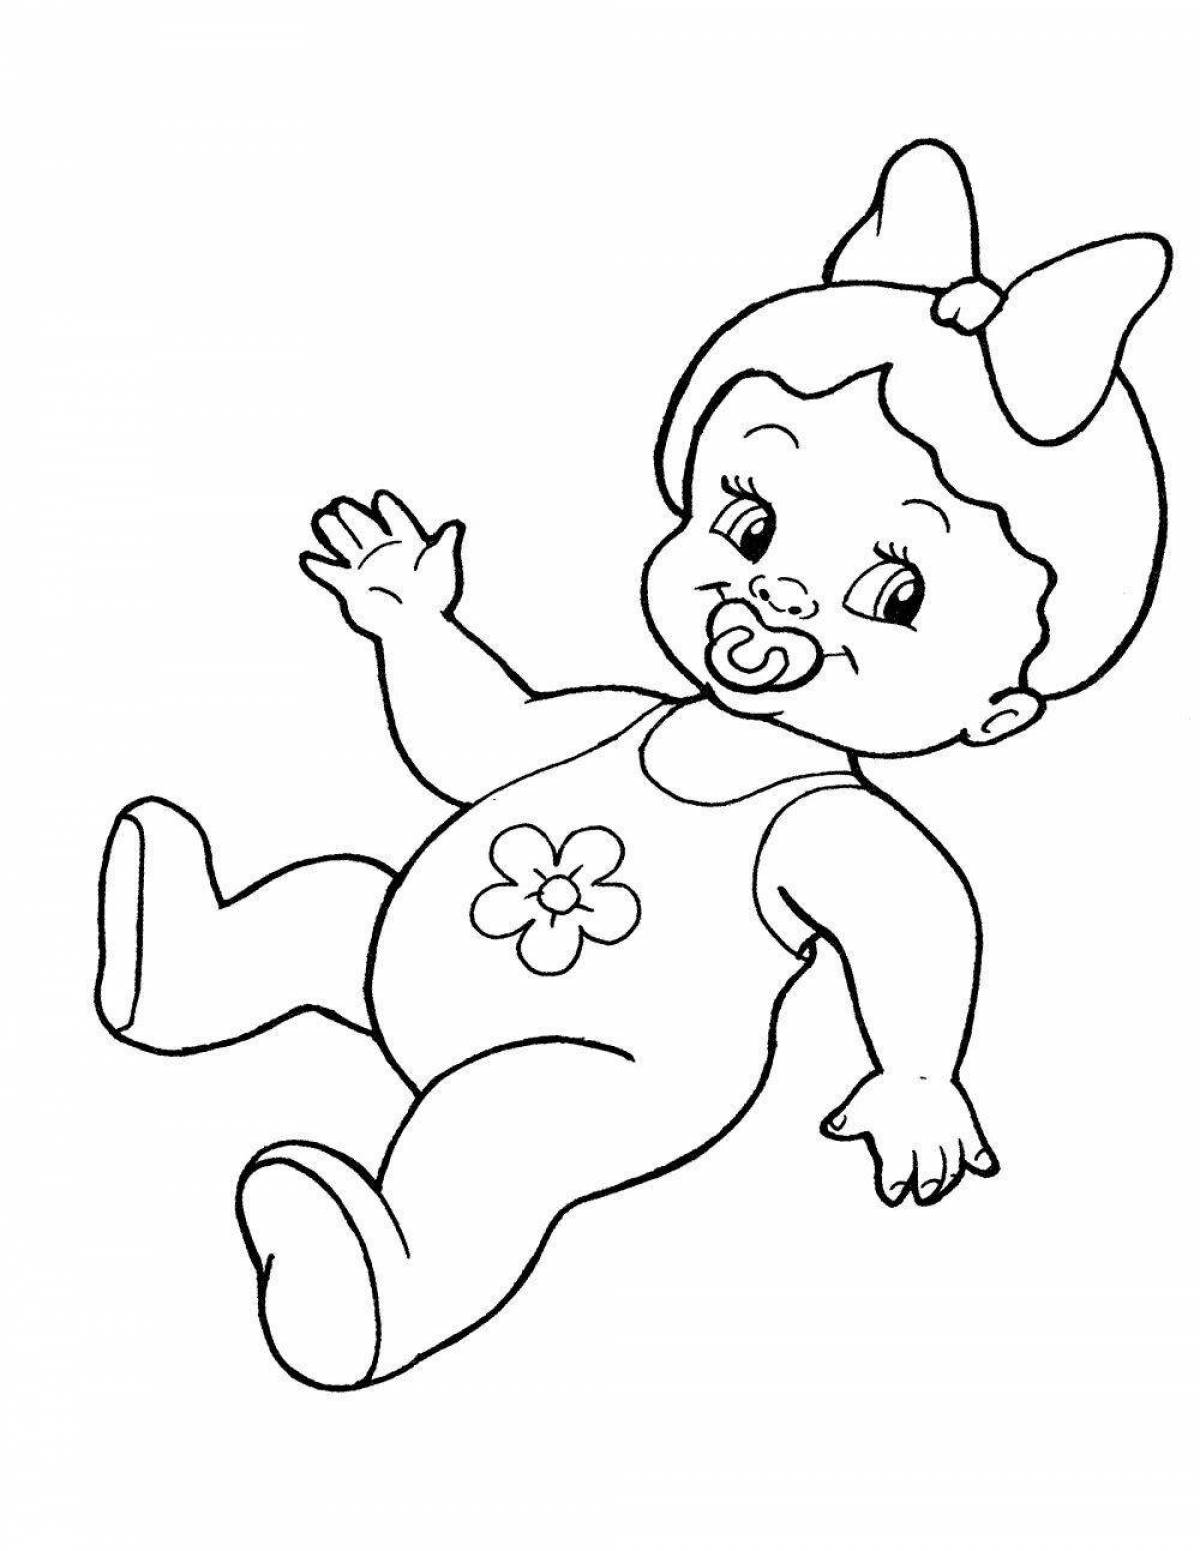 Luminous doll coloring page